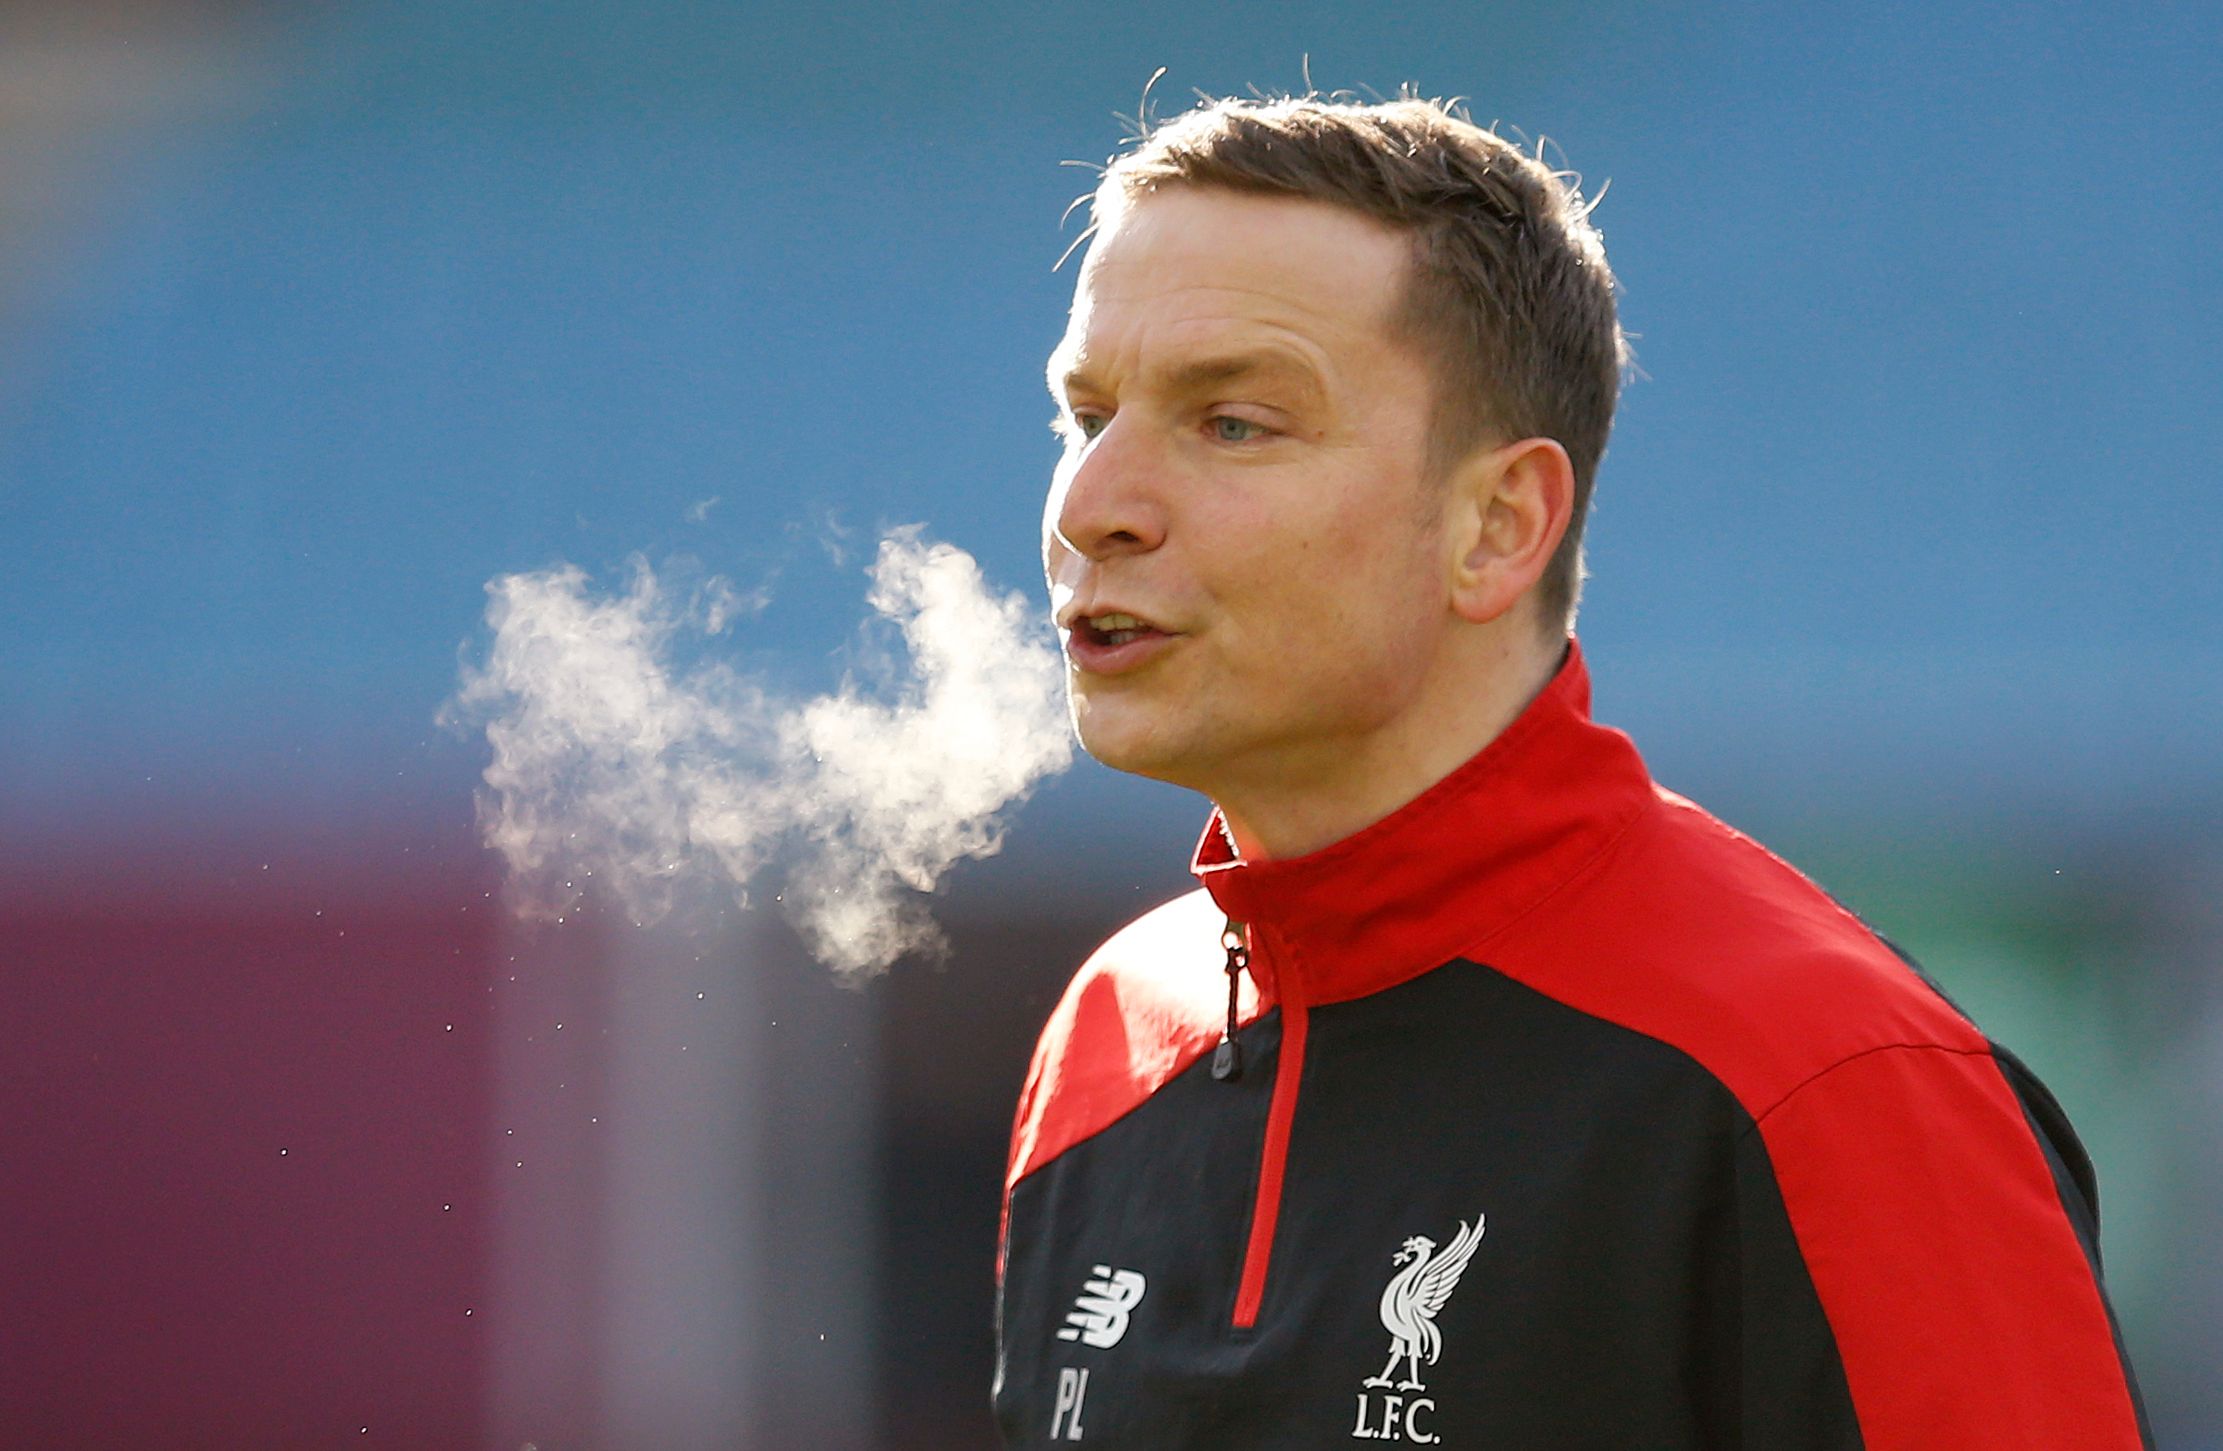 Football Soccer - Aston Villa v Liverpool - Barclays Premier League - Villa Park - 14/2/16 
Liverpool first team development coach Pepijn Lijnders before the game 
Reuters / Phil Noble 
Livepic 
EDITORIAL USE ONLY. No use with unauthorized audio, video, data, fixture lists, club/league logos or 